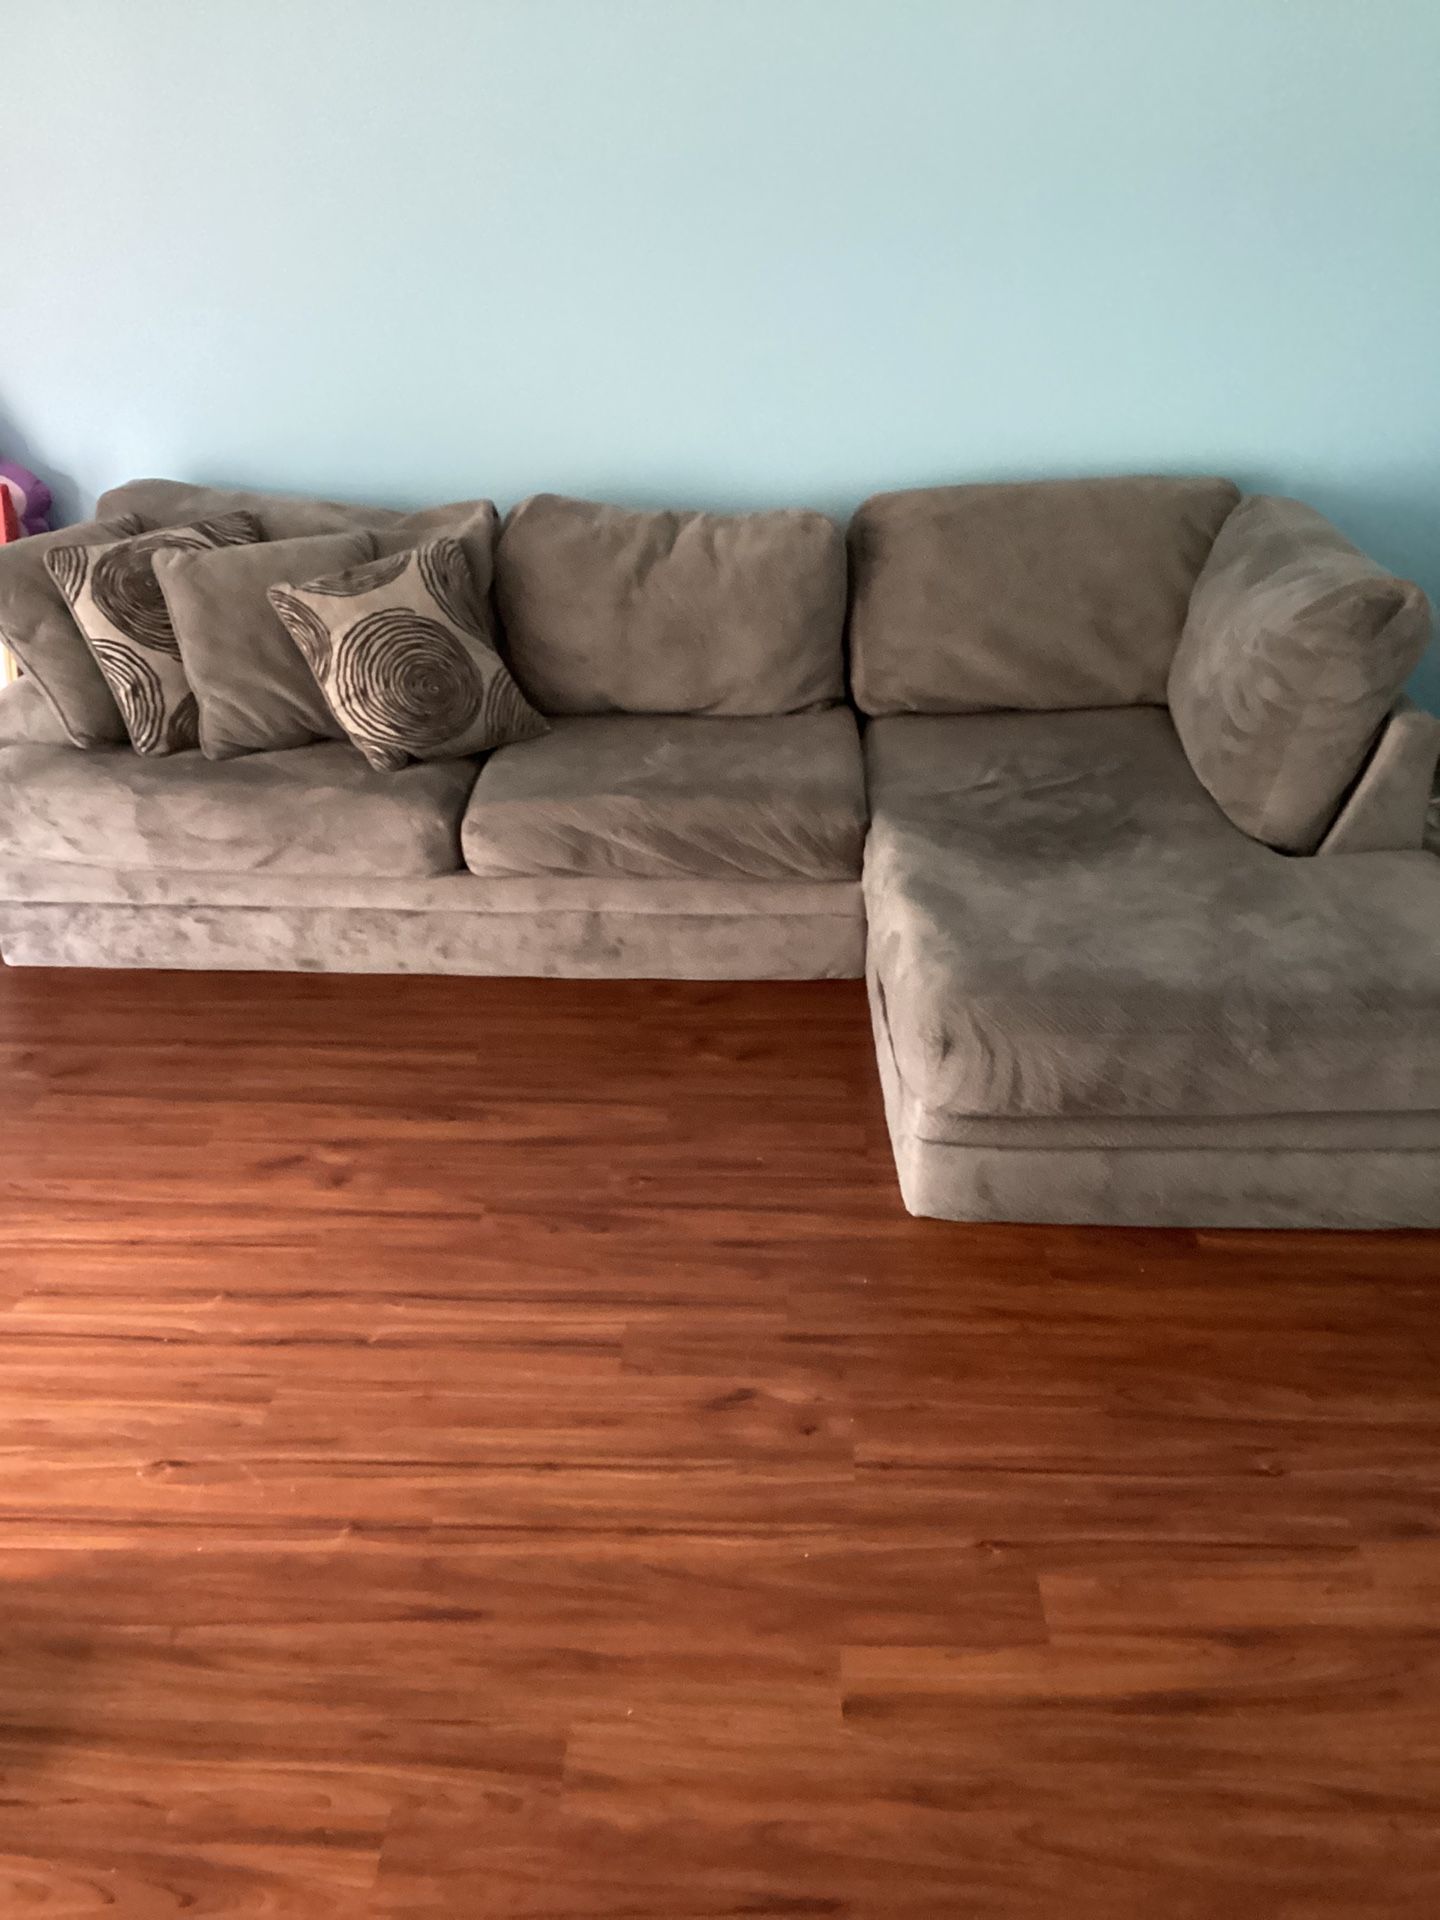 Free Couch, Must Be Able To Move On Your Own, First Come First Serve